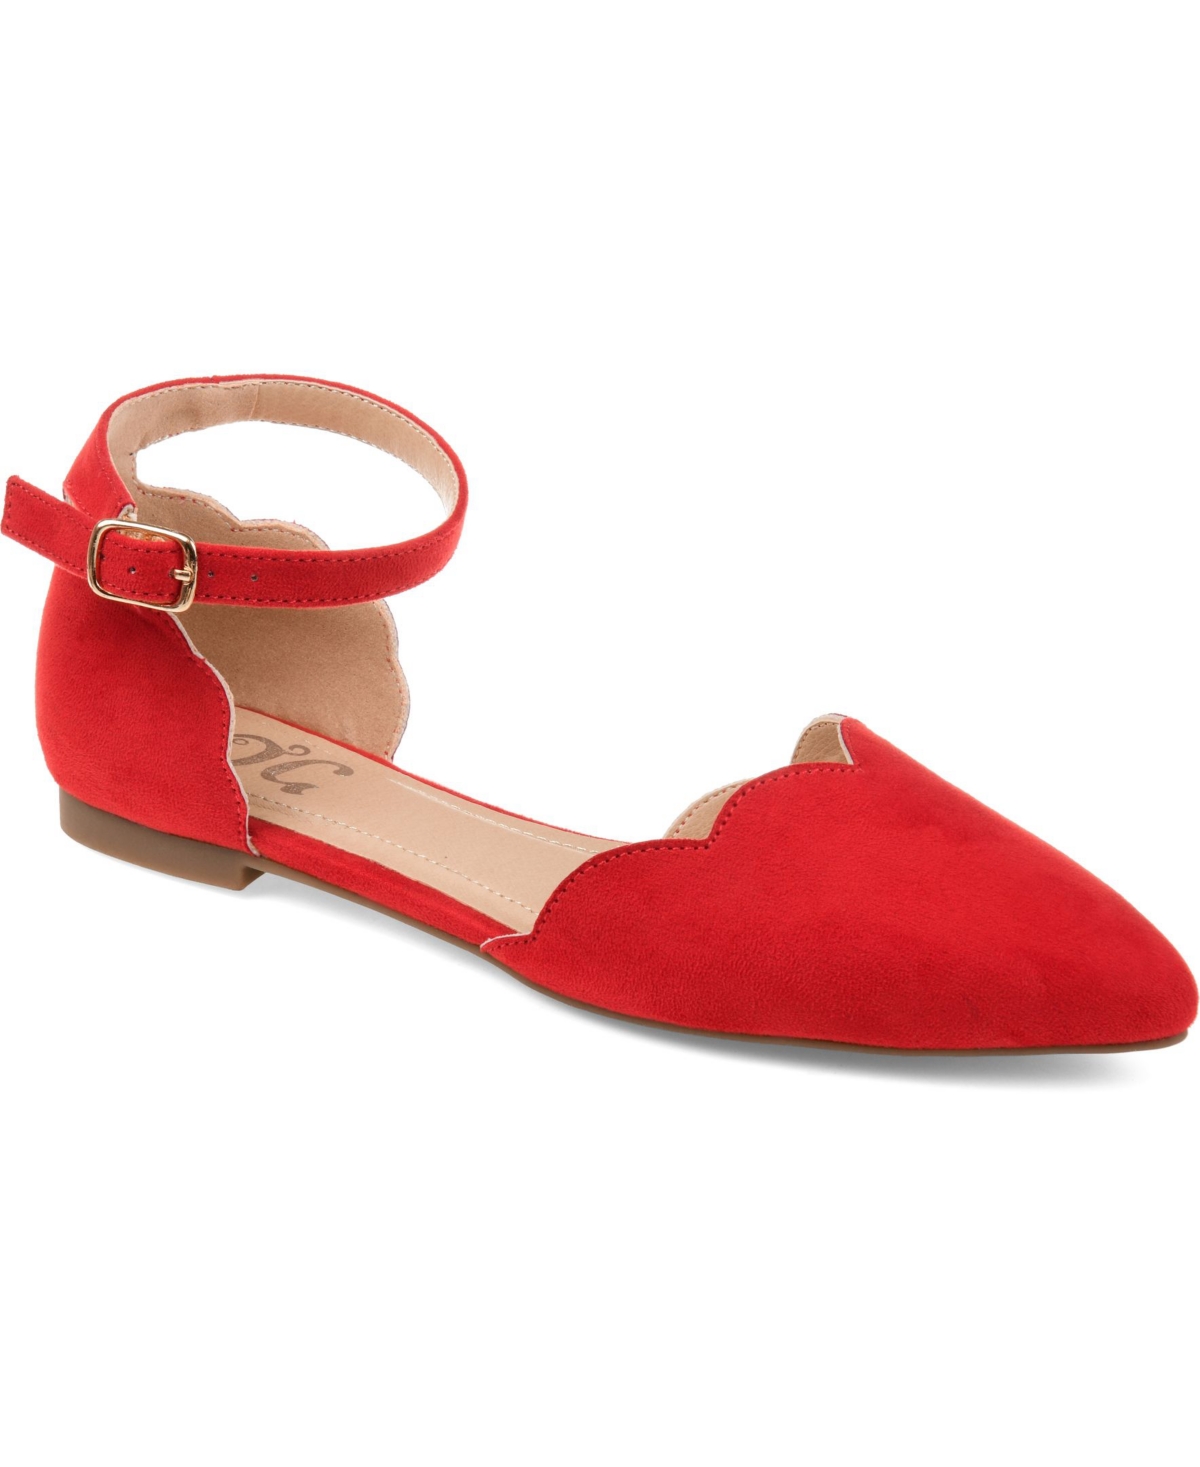 Women's Lana Scalloped Edge Ankle Strap Flats - Red